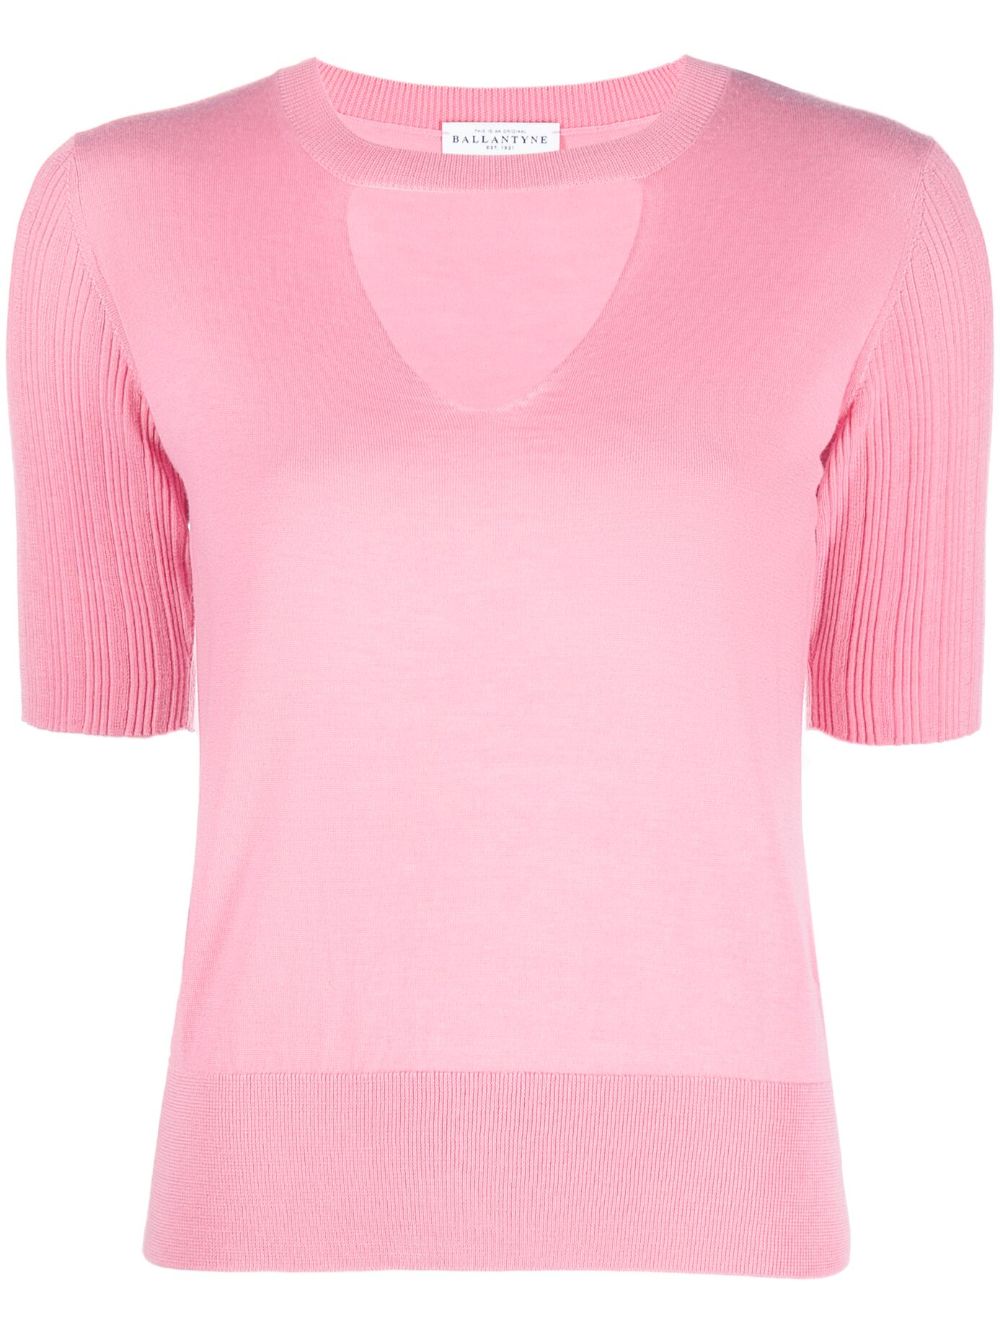 ballantyne cut-out knitted top - pink